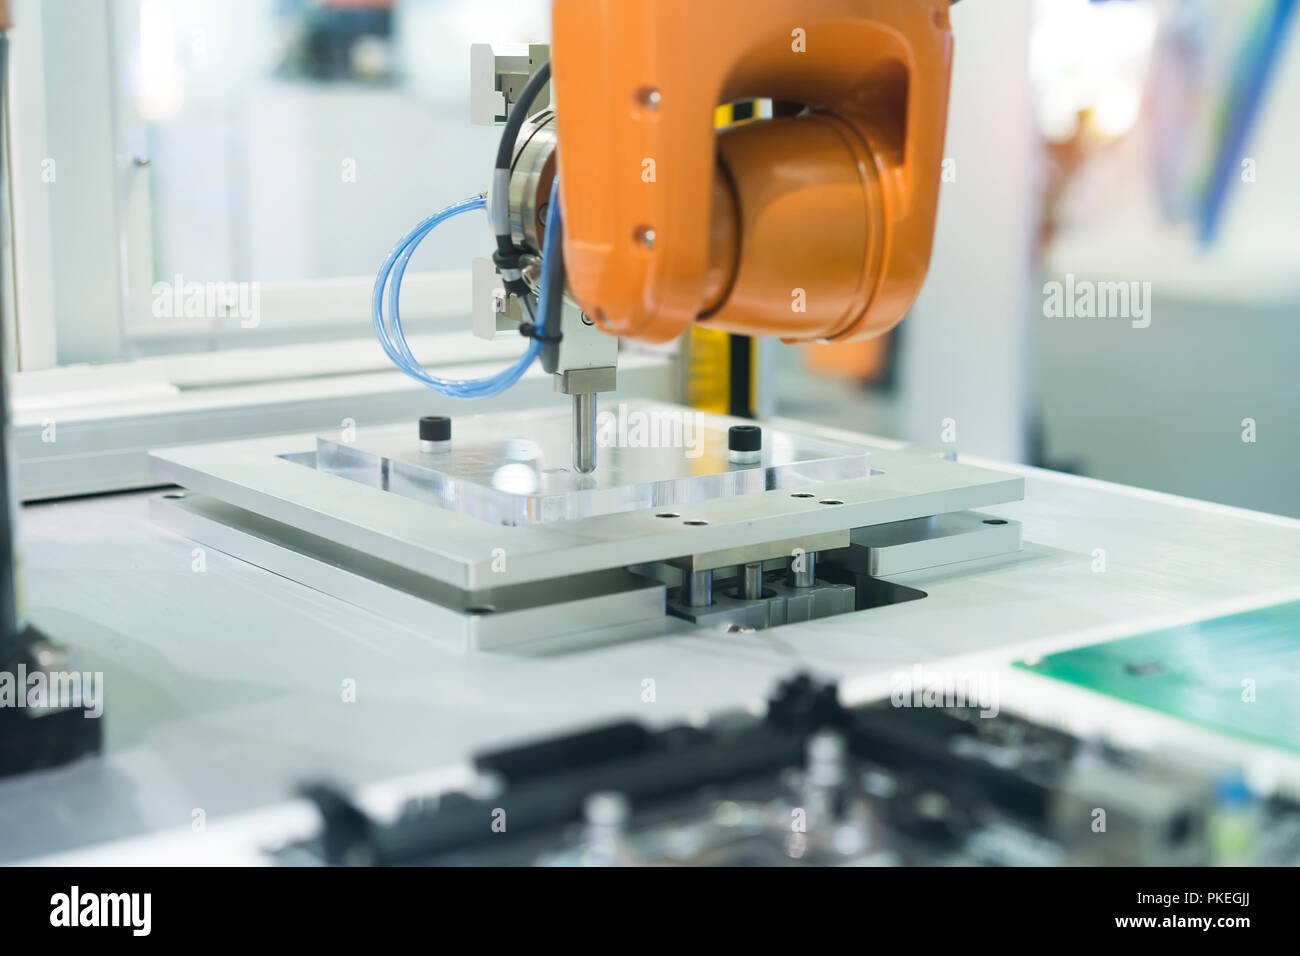 Robotic and Automation system control application on automate robot arm Stock Photo